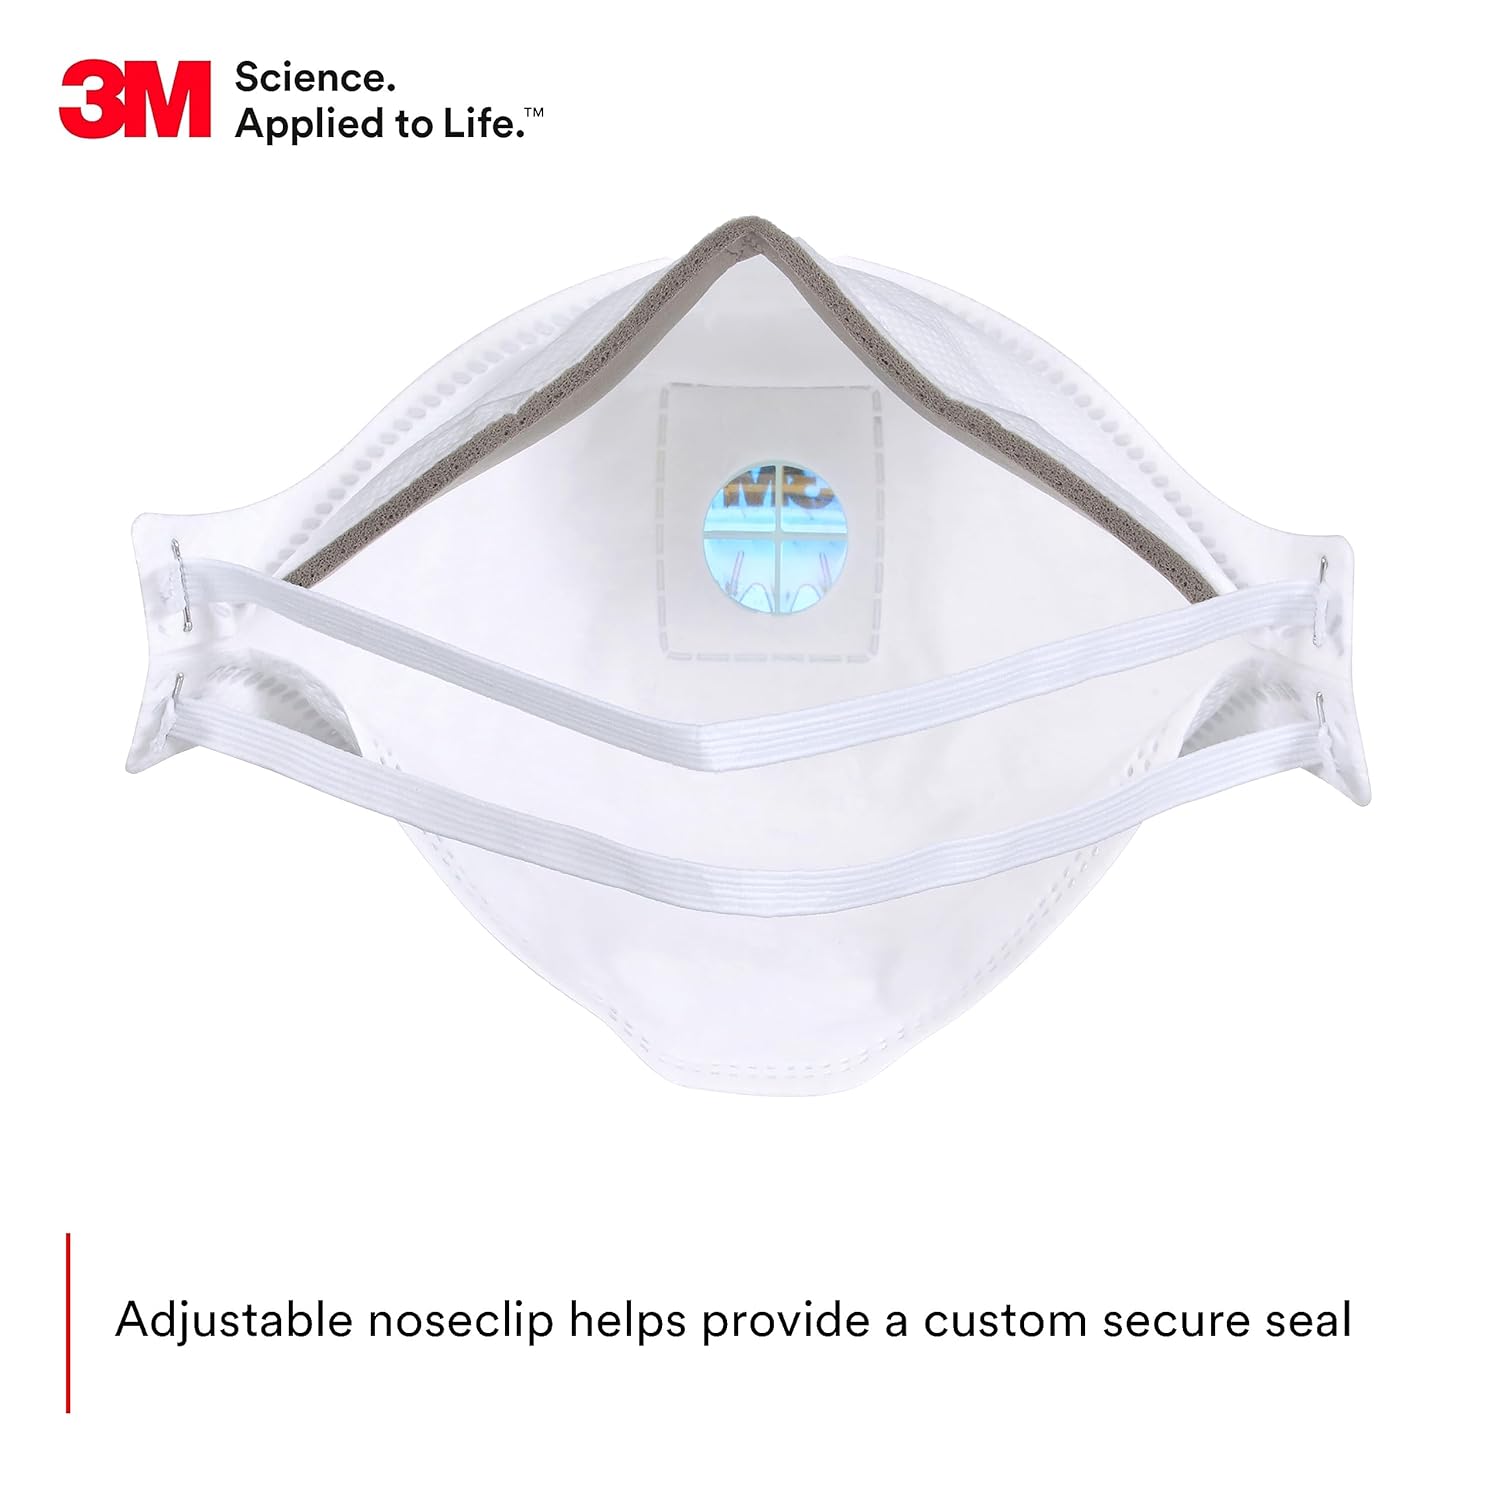 3M Aura Particulate Respirator 9211+, N95, Pack of 10 Disposable Respirators, Individually Wrapped, Cool Flow Valve, Flat Fold Design Allows for Facial Movement, NIOSH Approved, Comfort Plus, Dust